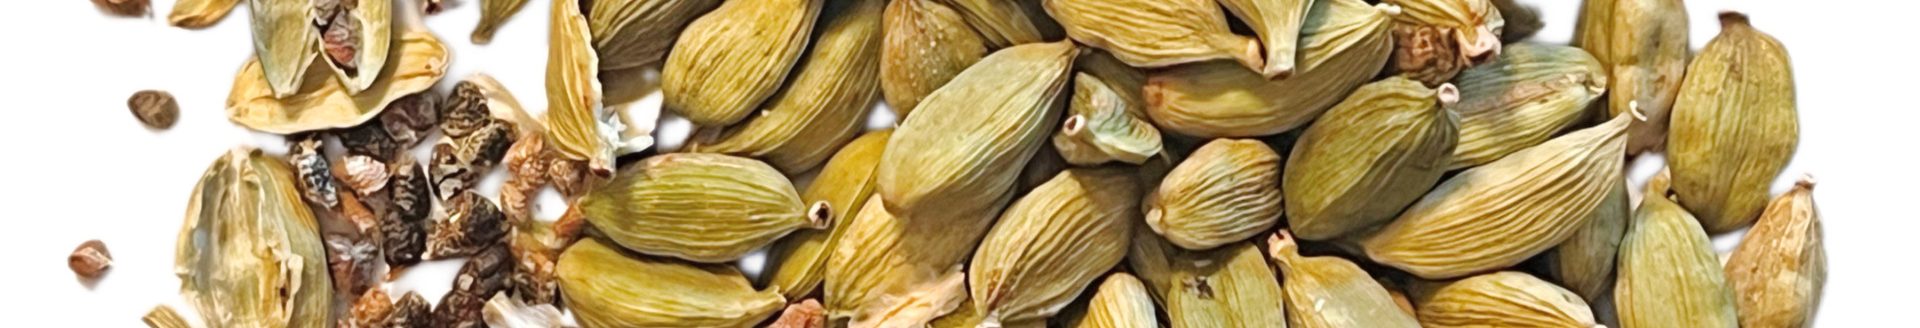 Cardamom has shown a range of health benefits, including weight loss and reducing inflammation. (Texas A&M AgriLife Courtesy photo)